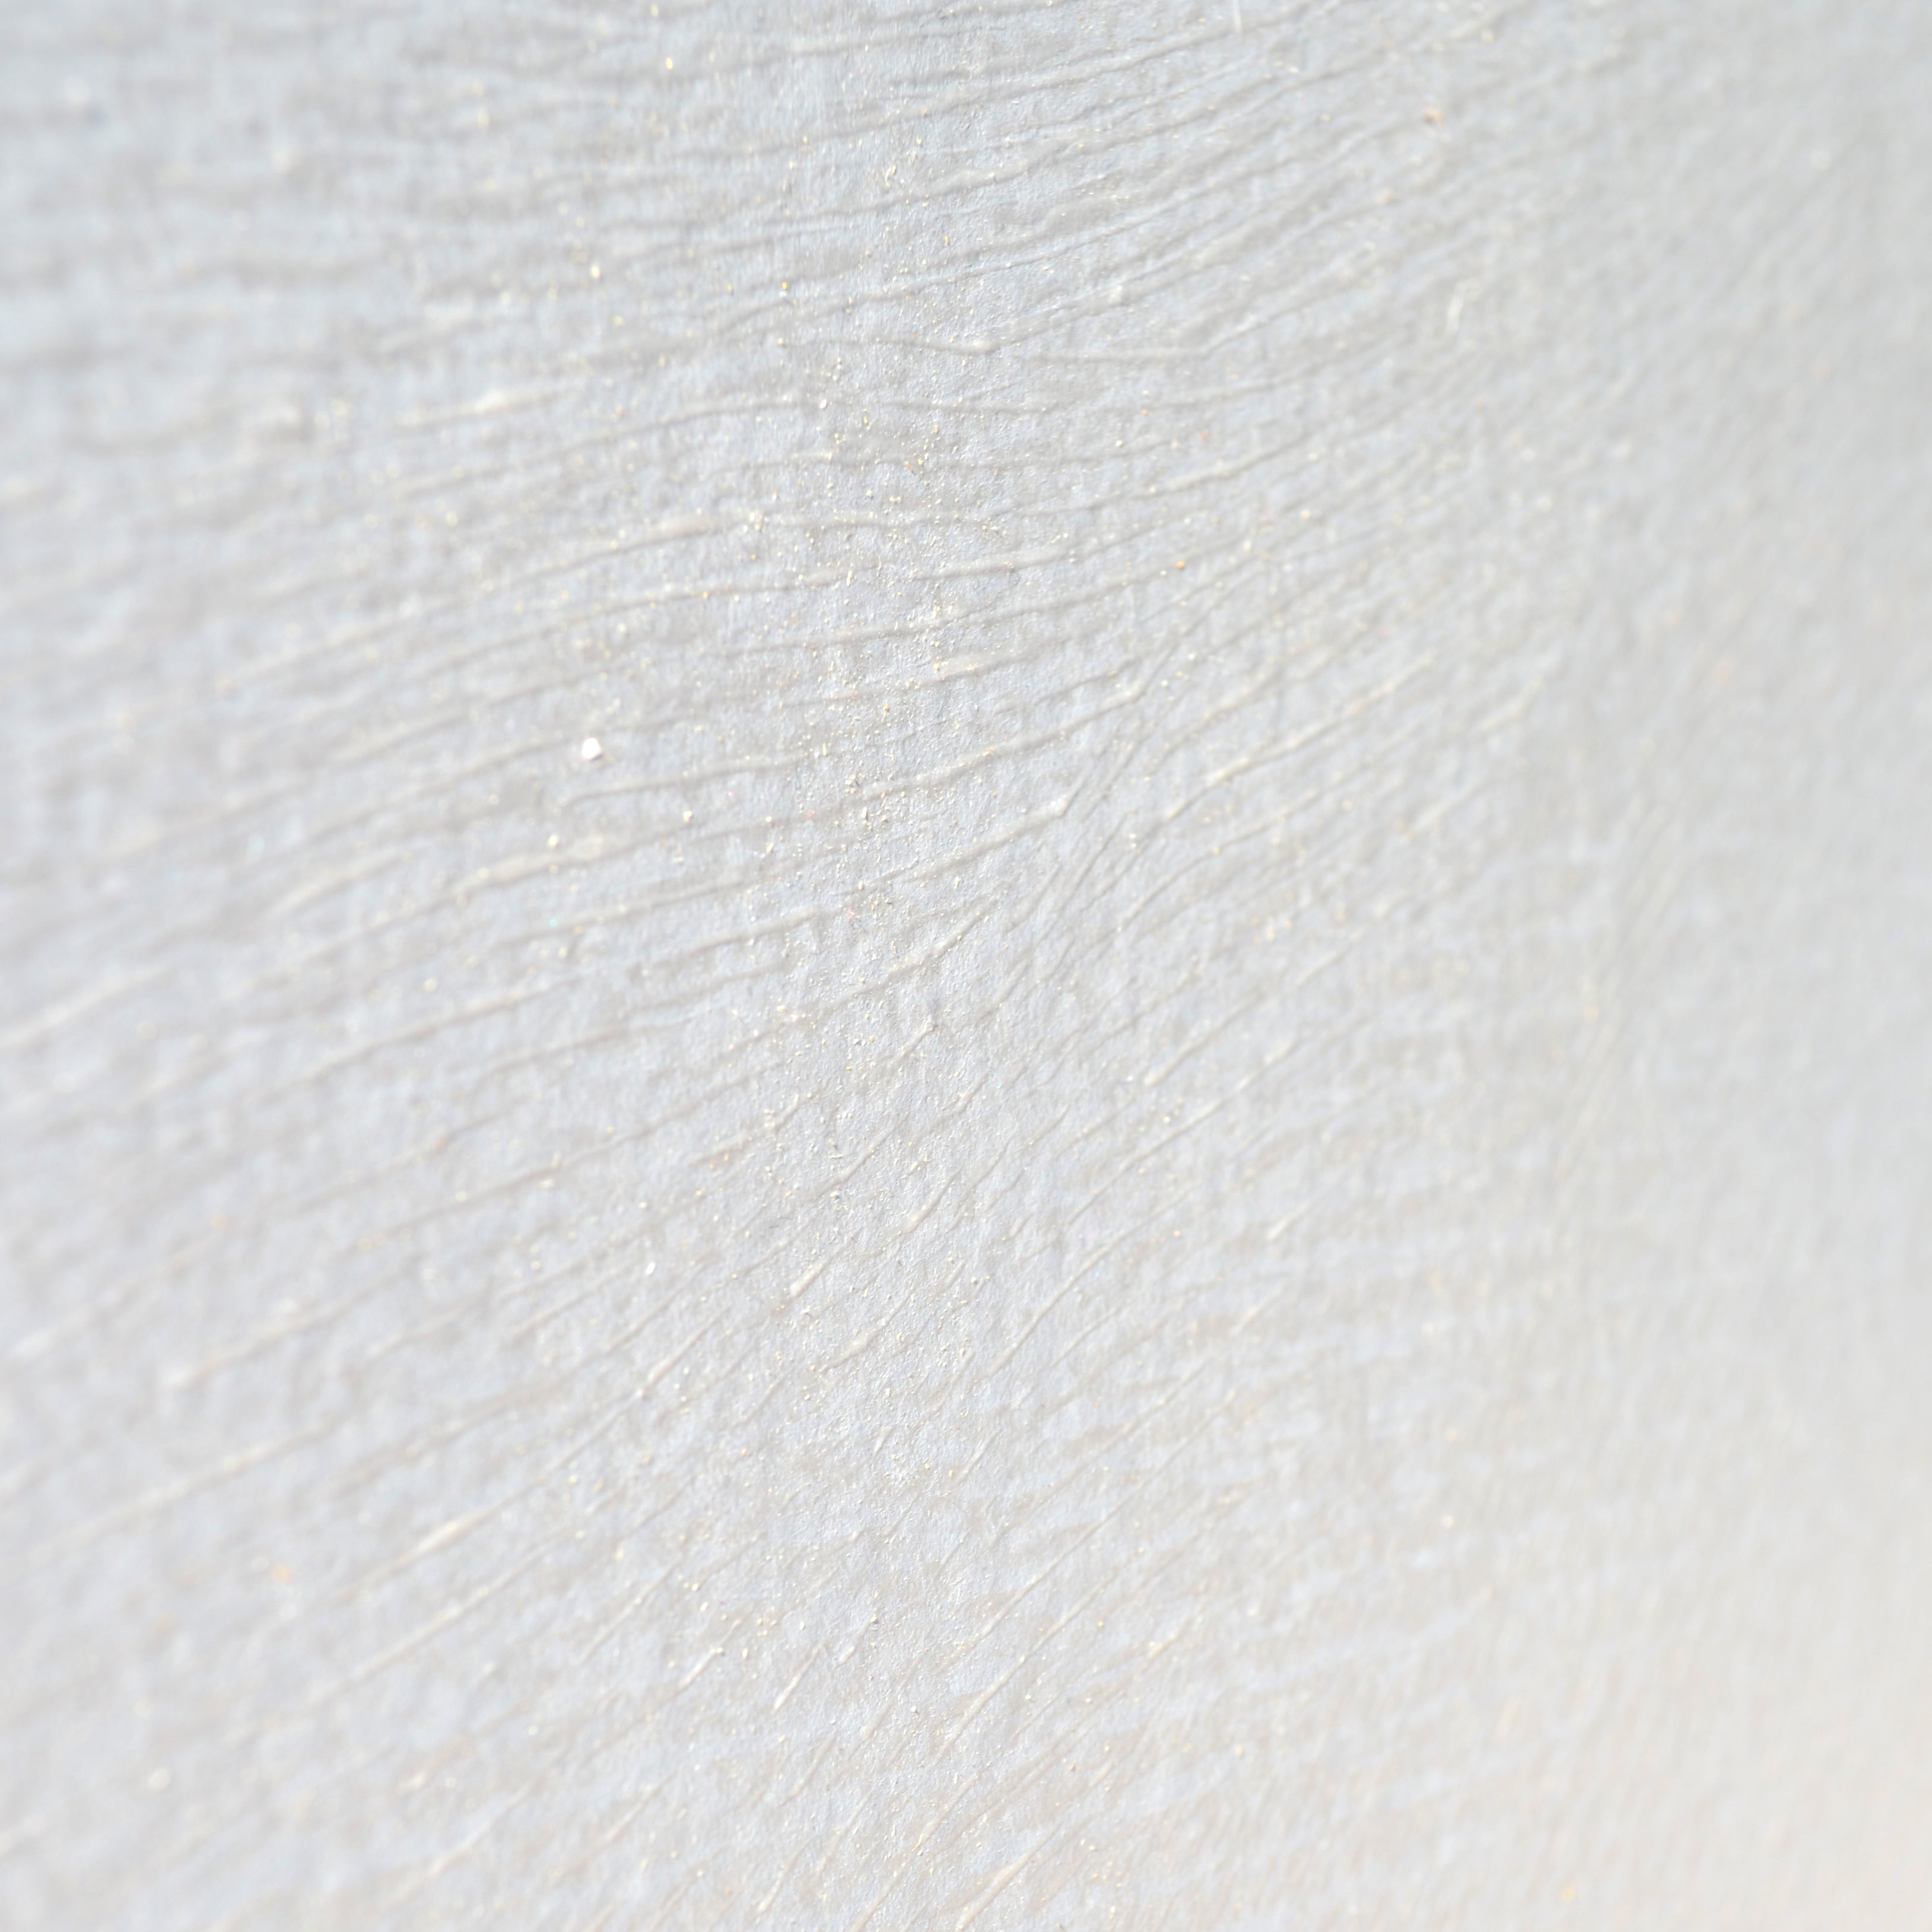 Detail of a wallpaper in an abstract ridged texture in metallic pearl.